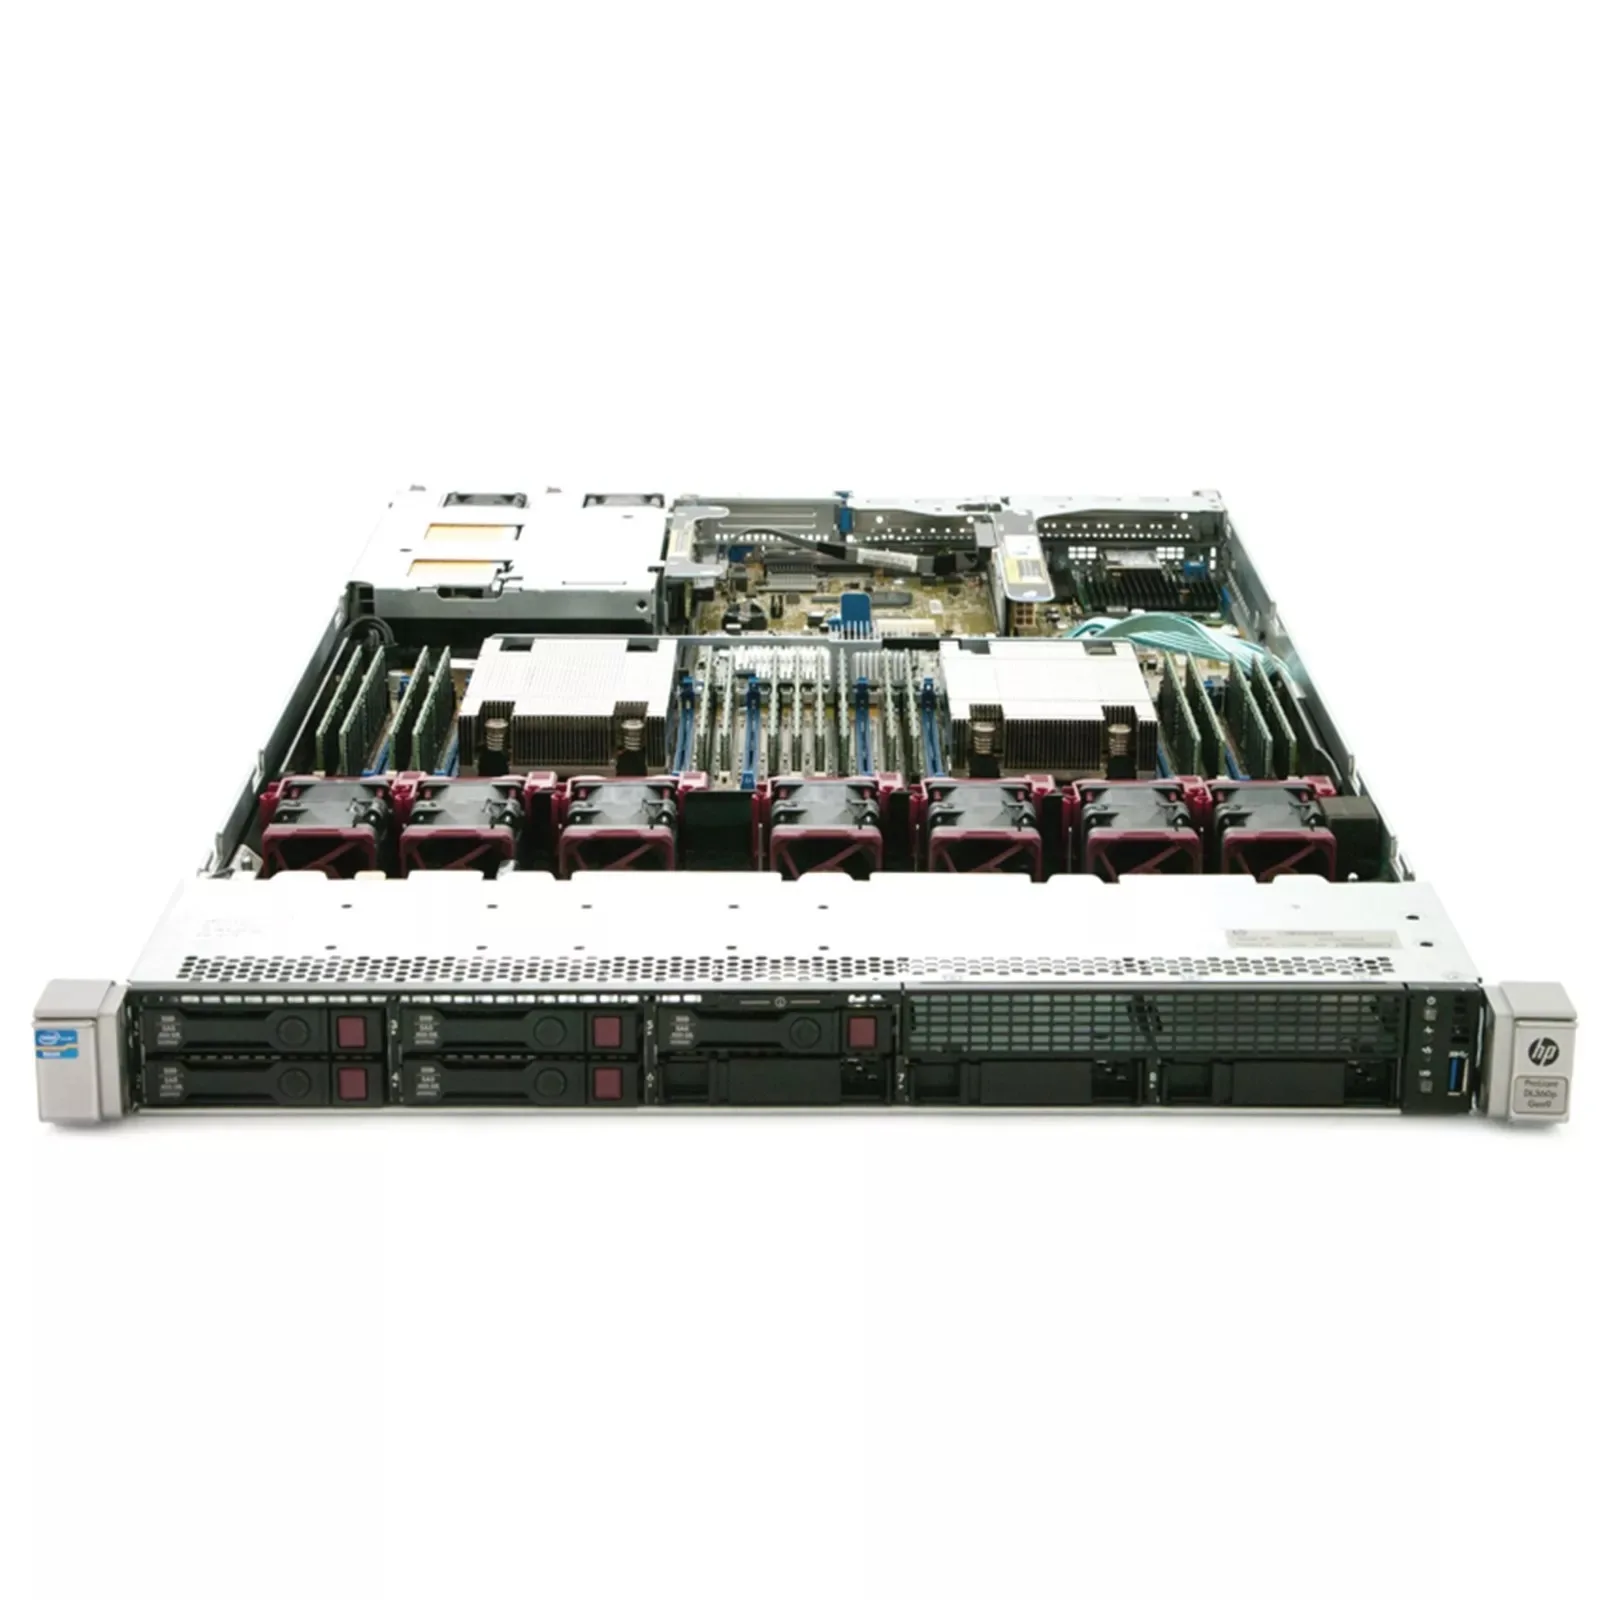 HPE DL360 Gen8 with 32GB (1 x 32GB) Dual rank x4 DDR4-2666 4208cpu and win10 key